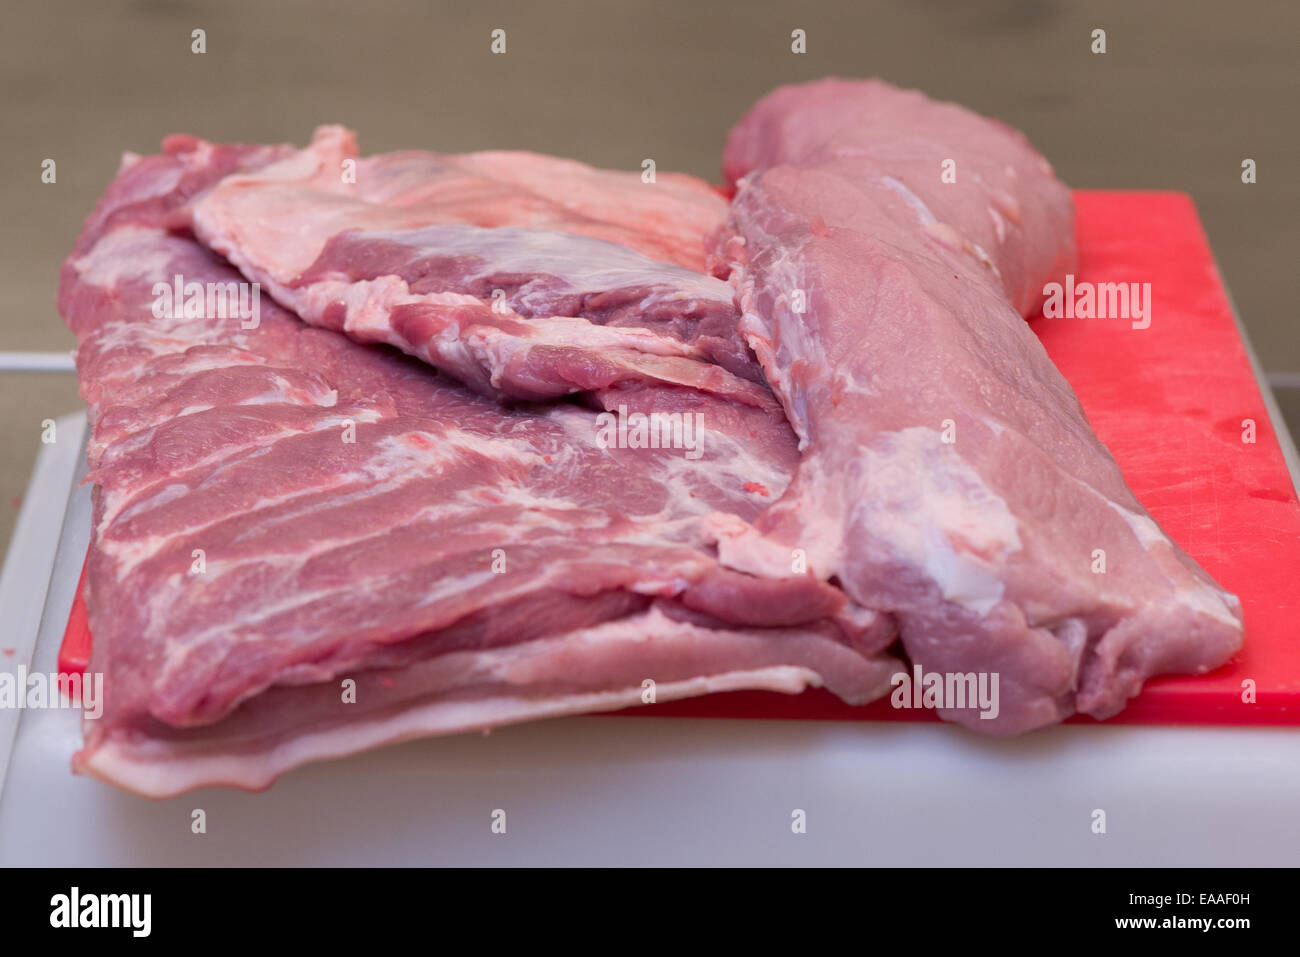 Joint pork on a red chopping board raw meat Stock Photo